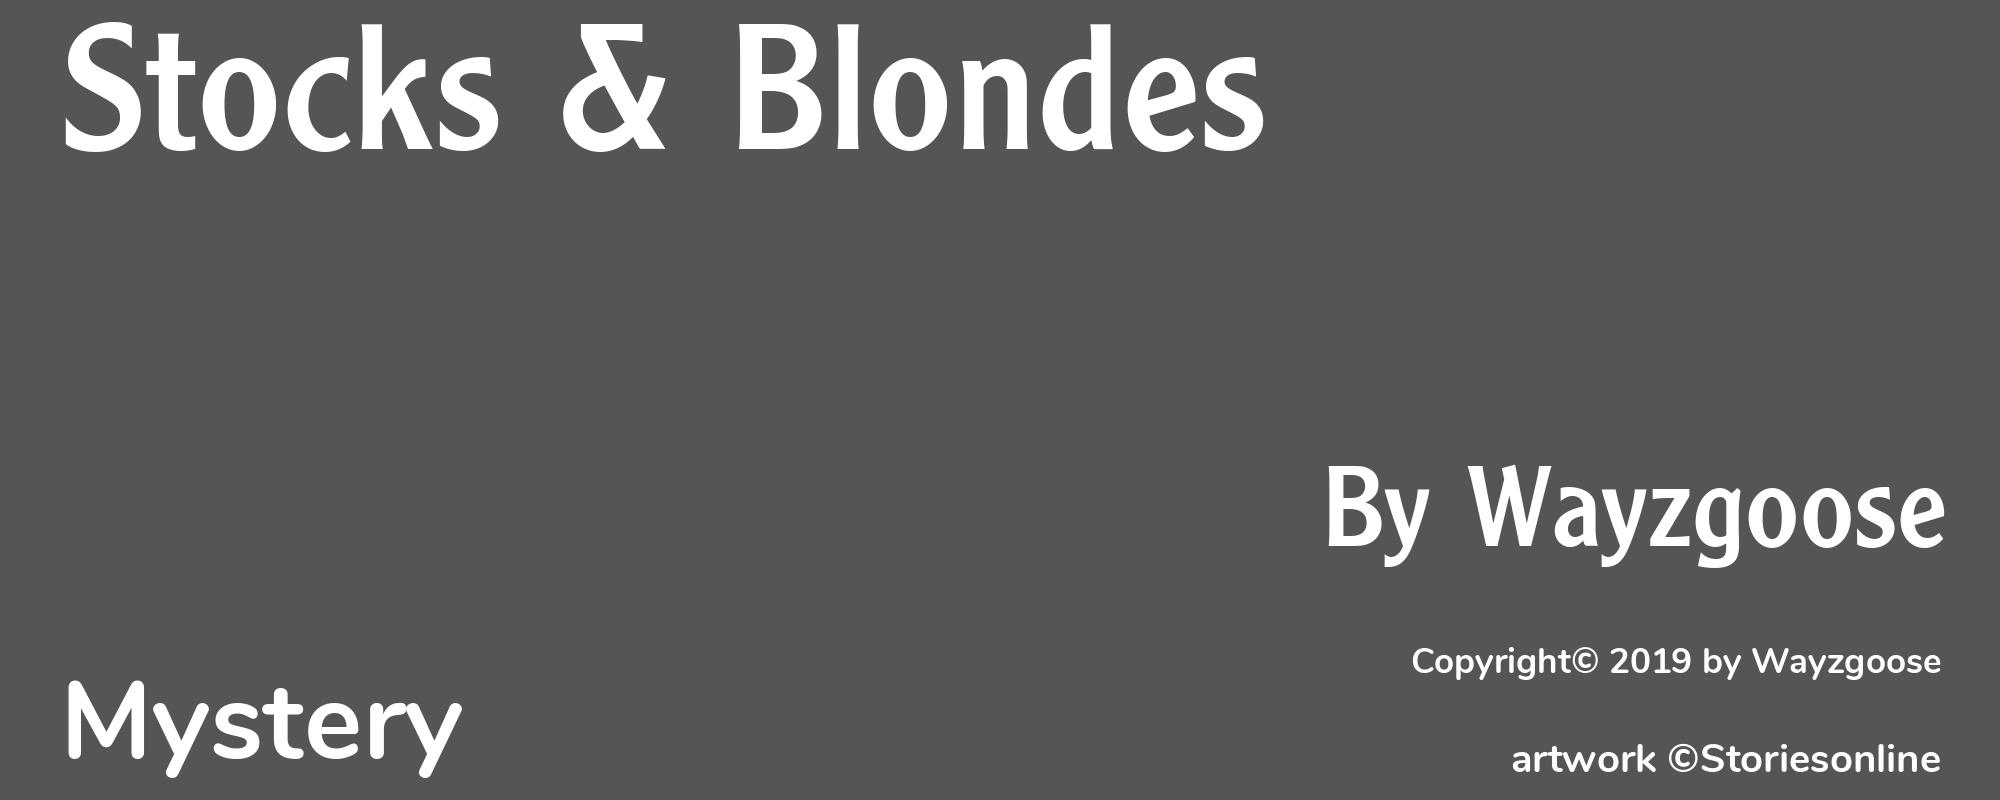 Stocks & Blondes - Cover